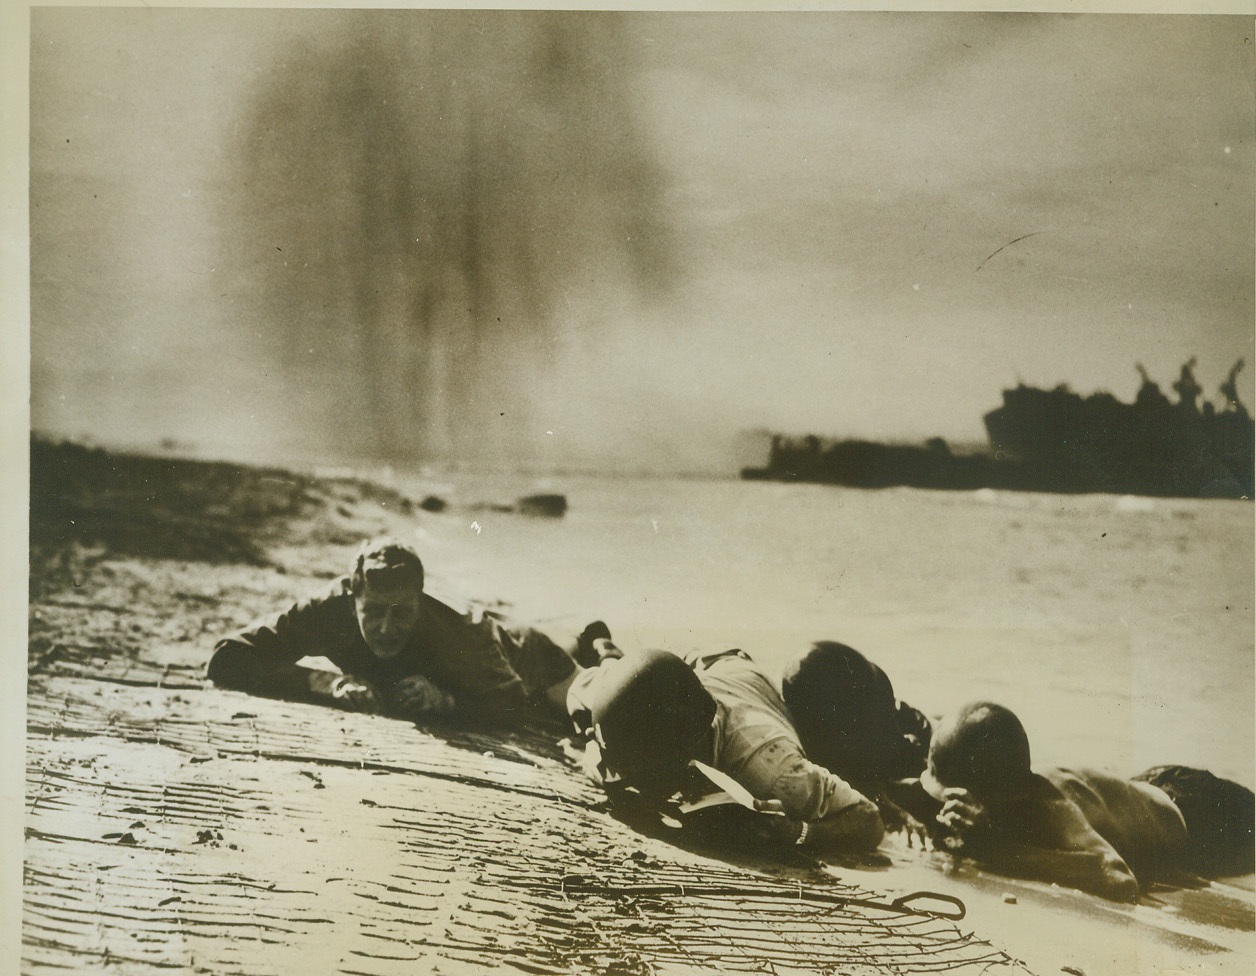 Hit the Dirt, Sailor!, 9/23/1943. Paesternum, Italy – U.S. Coast Guardsmen and Navy beach battalion men hug the beach as a Nazi bomber dumps its load near them at Paesternum, south of Salerno, during the bloody fighting in that area. In the background, (top center in photo), a cloud of black smoke from a bomb explosion hangs in the air. Hey, Sailor, keep that head down! Credit: (U.S. Coast Guard Photo from ACME);